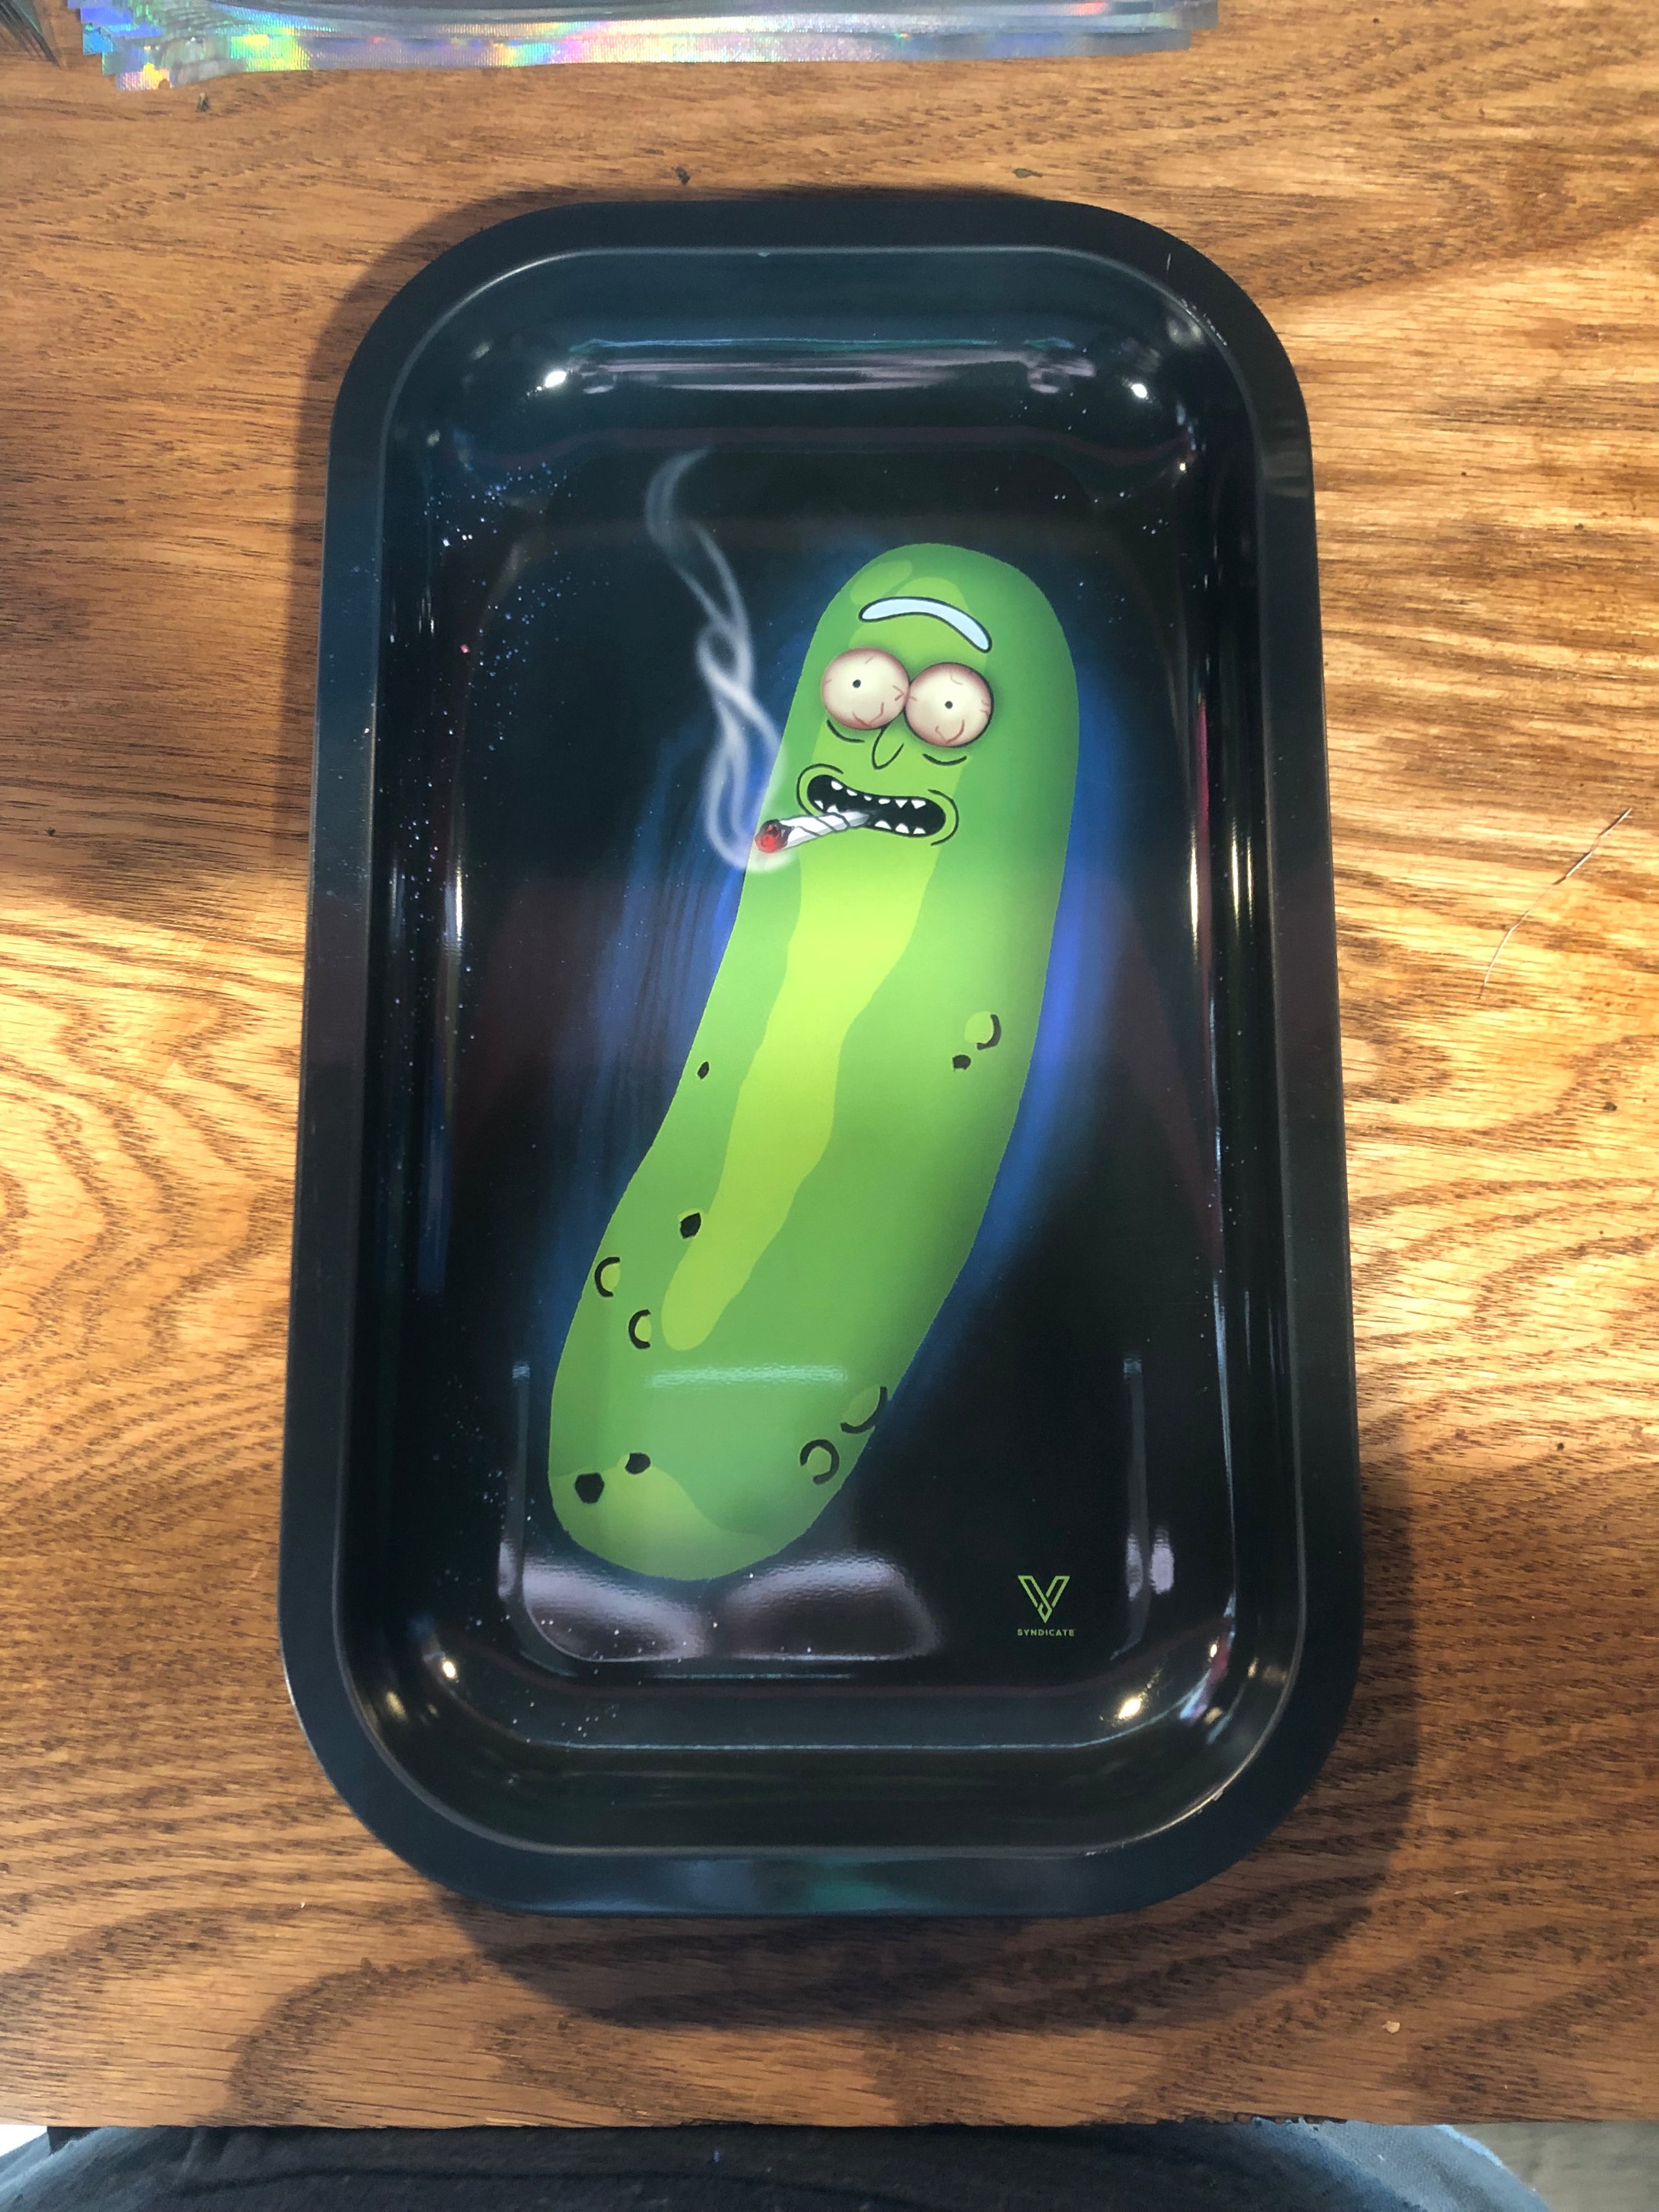 Rolling Tray Metal 290x190mm Rick and Morty Running